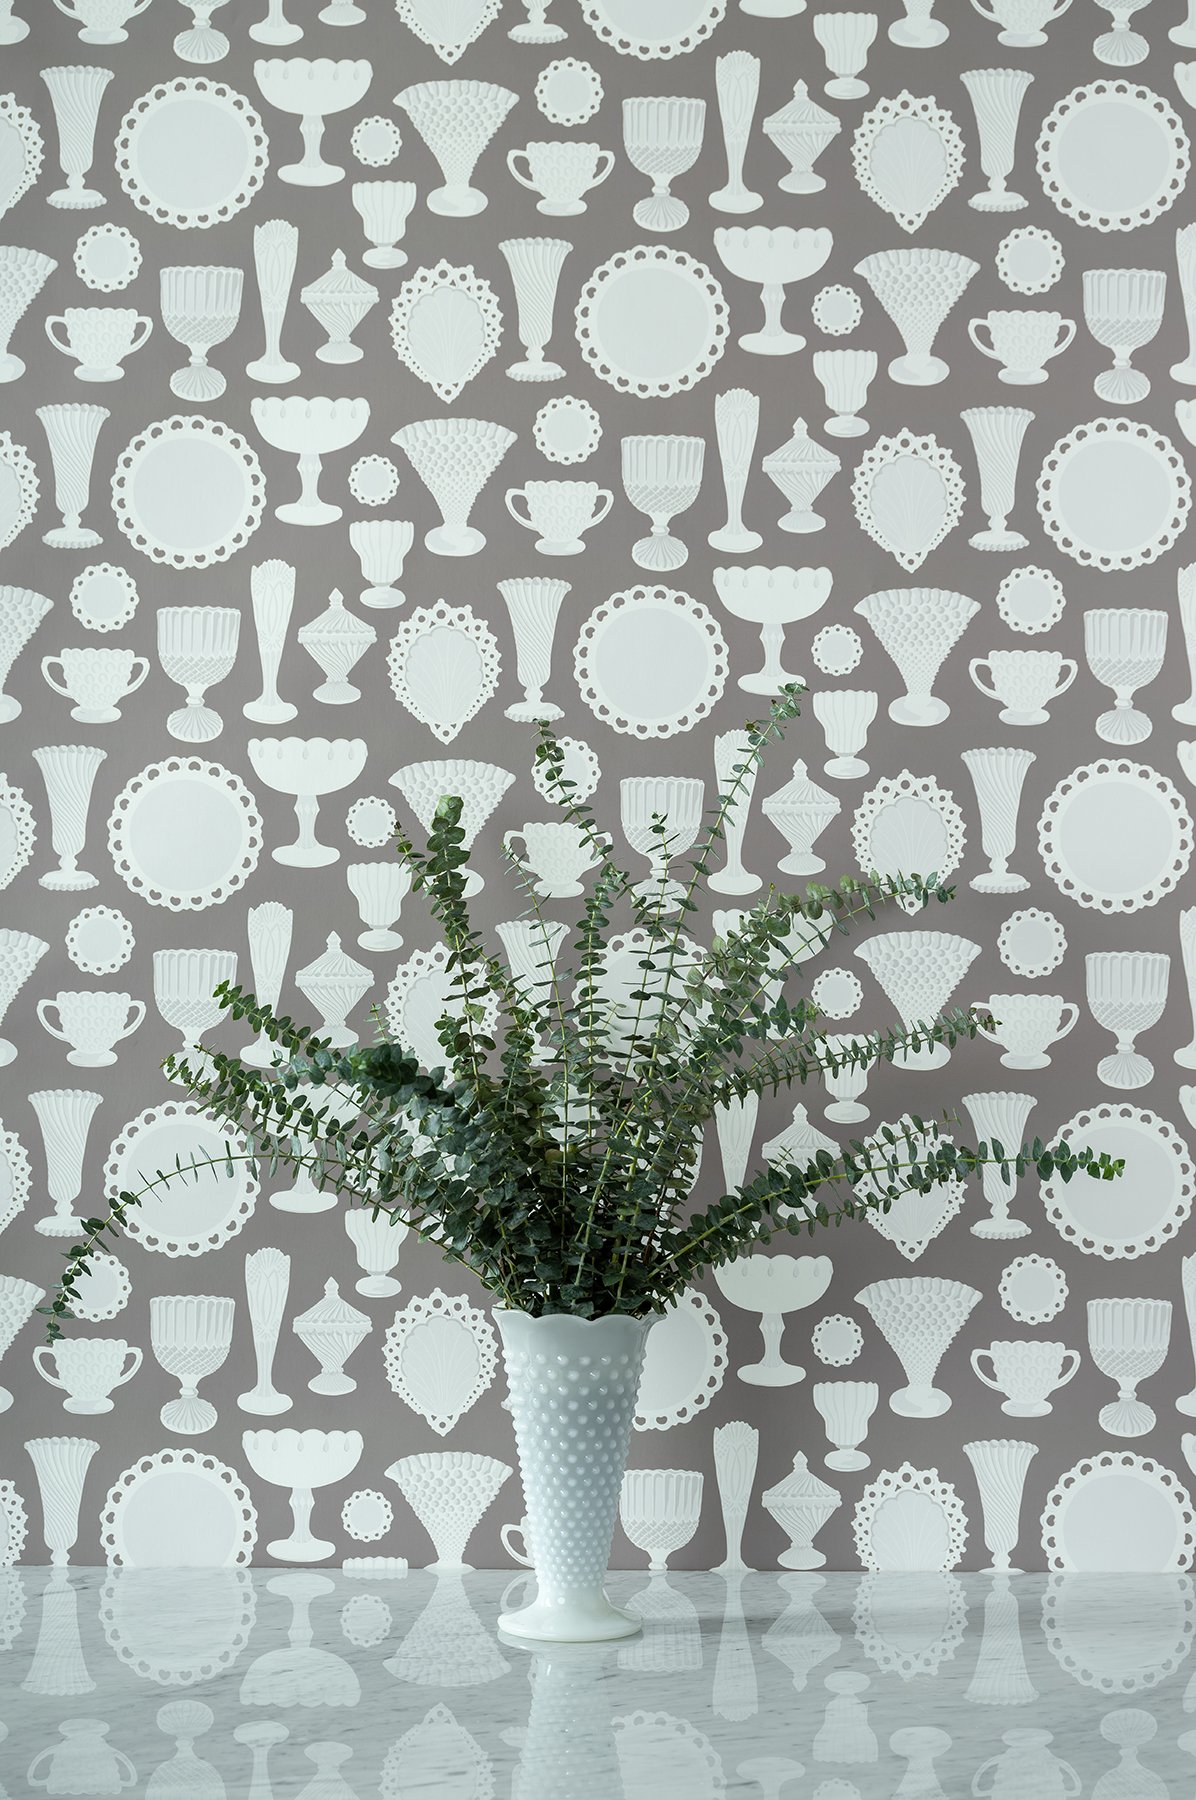 Kate Golding Milk Glass Brown wallpaper // Modern wallcoverings and interior decor.